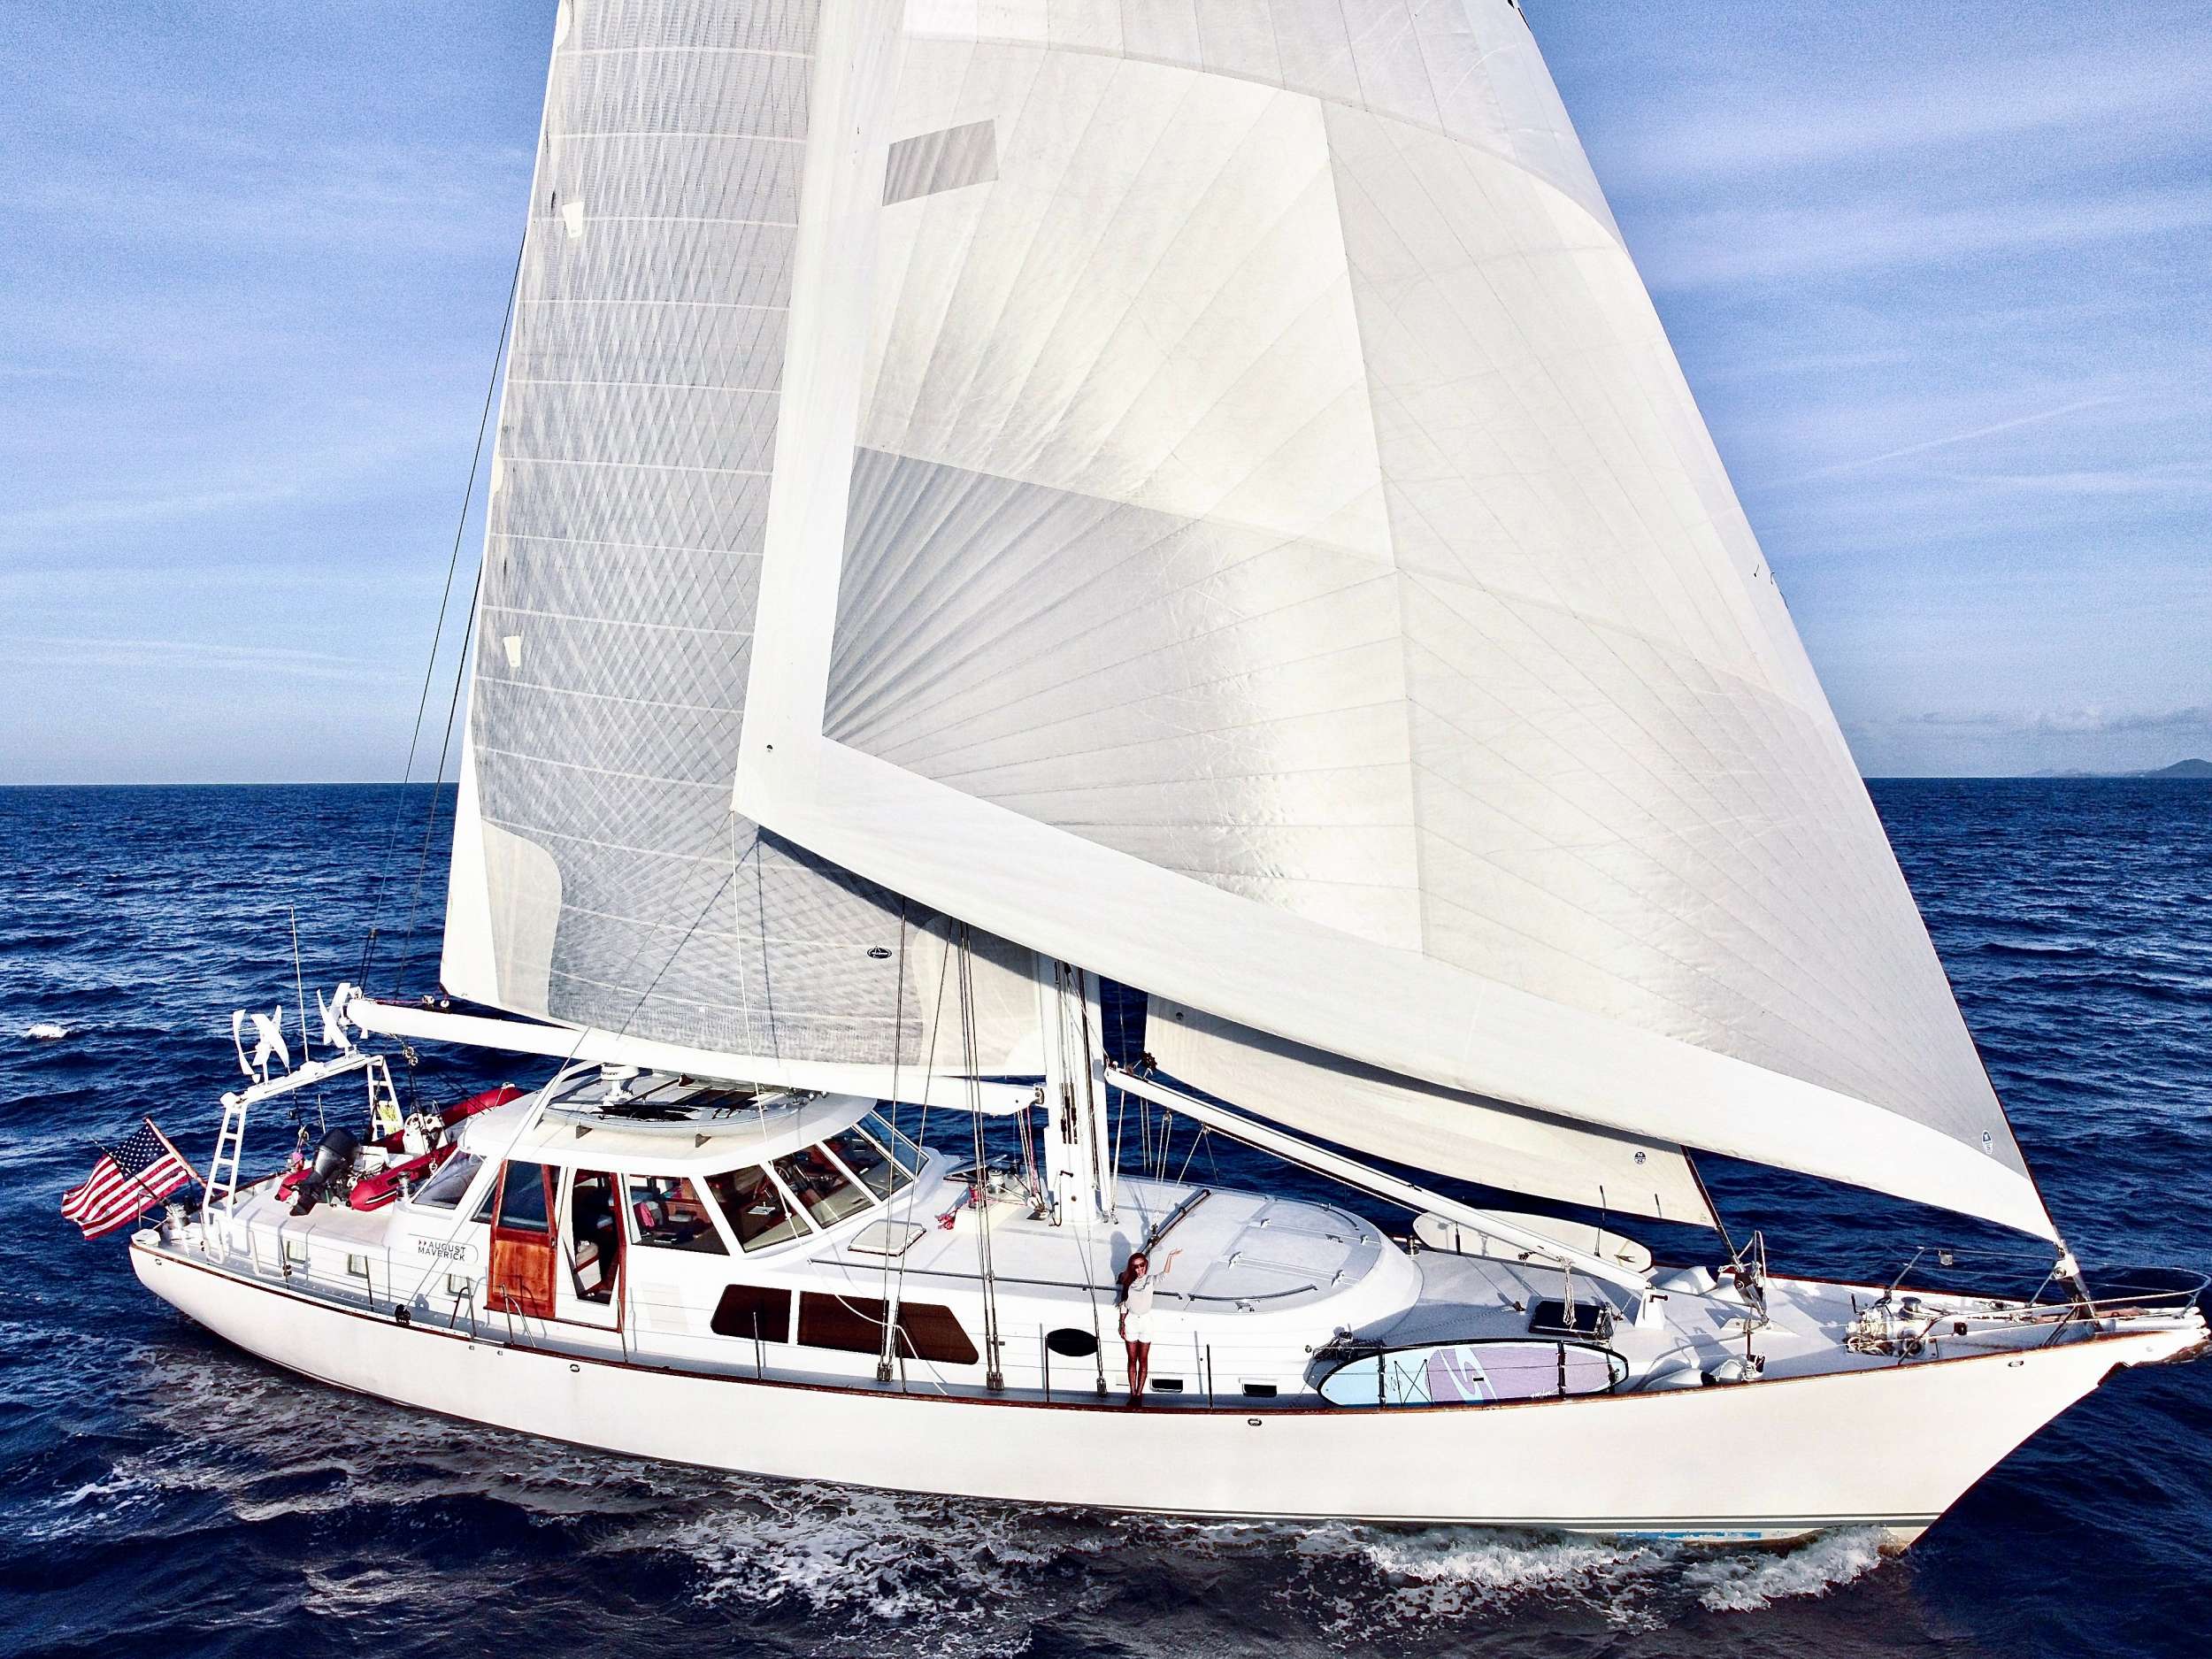 August Maverick Crewed Yacht Charter Sailing the Caribbean and New England.